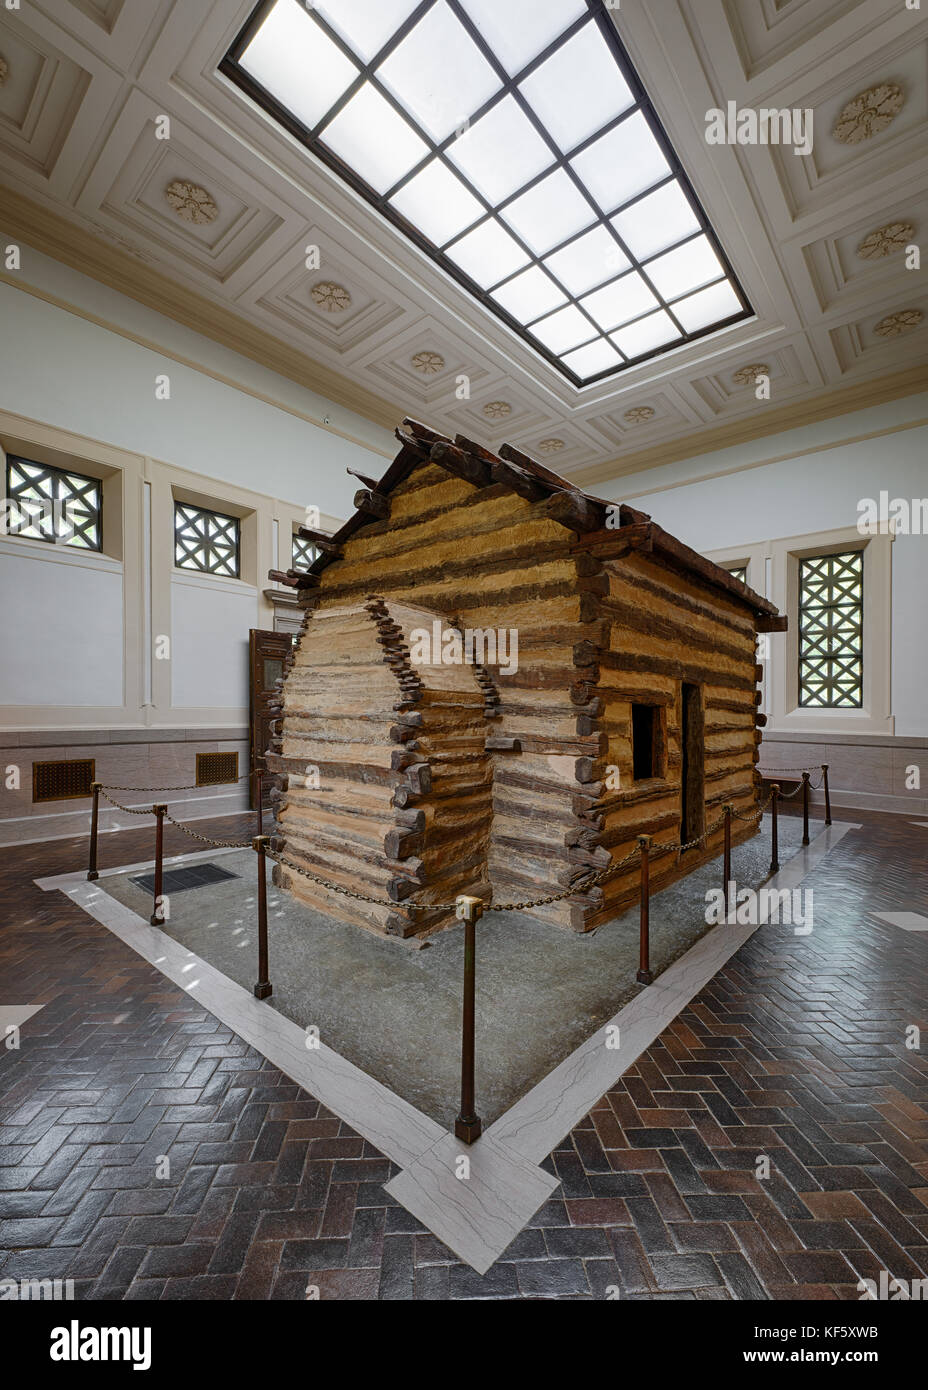 Log cabin inside the first Lincoln Memorial building at Abraham Lincoln Birthplace National Historical Park in Hodgenville, KY Stock Photo